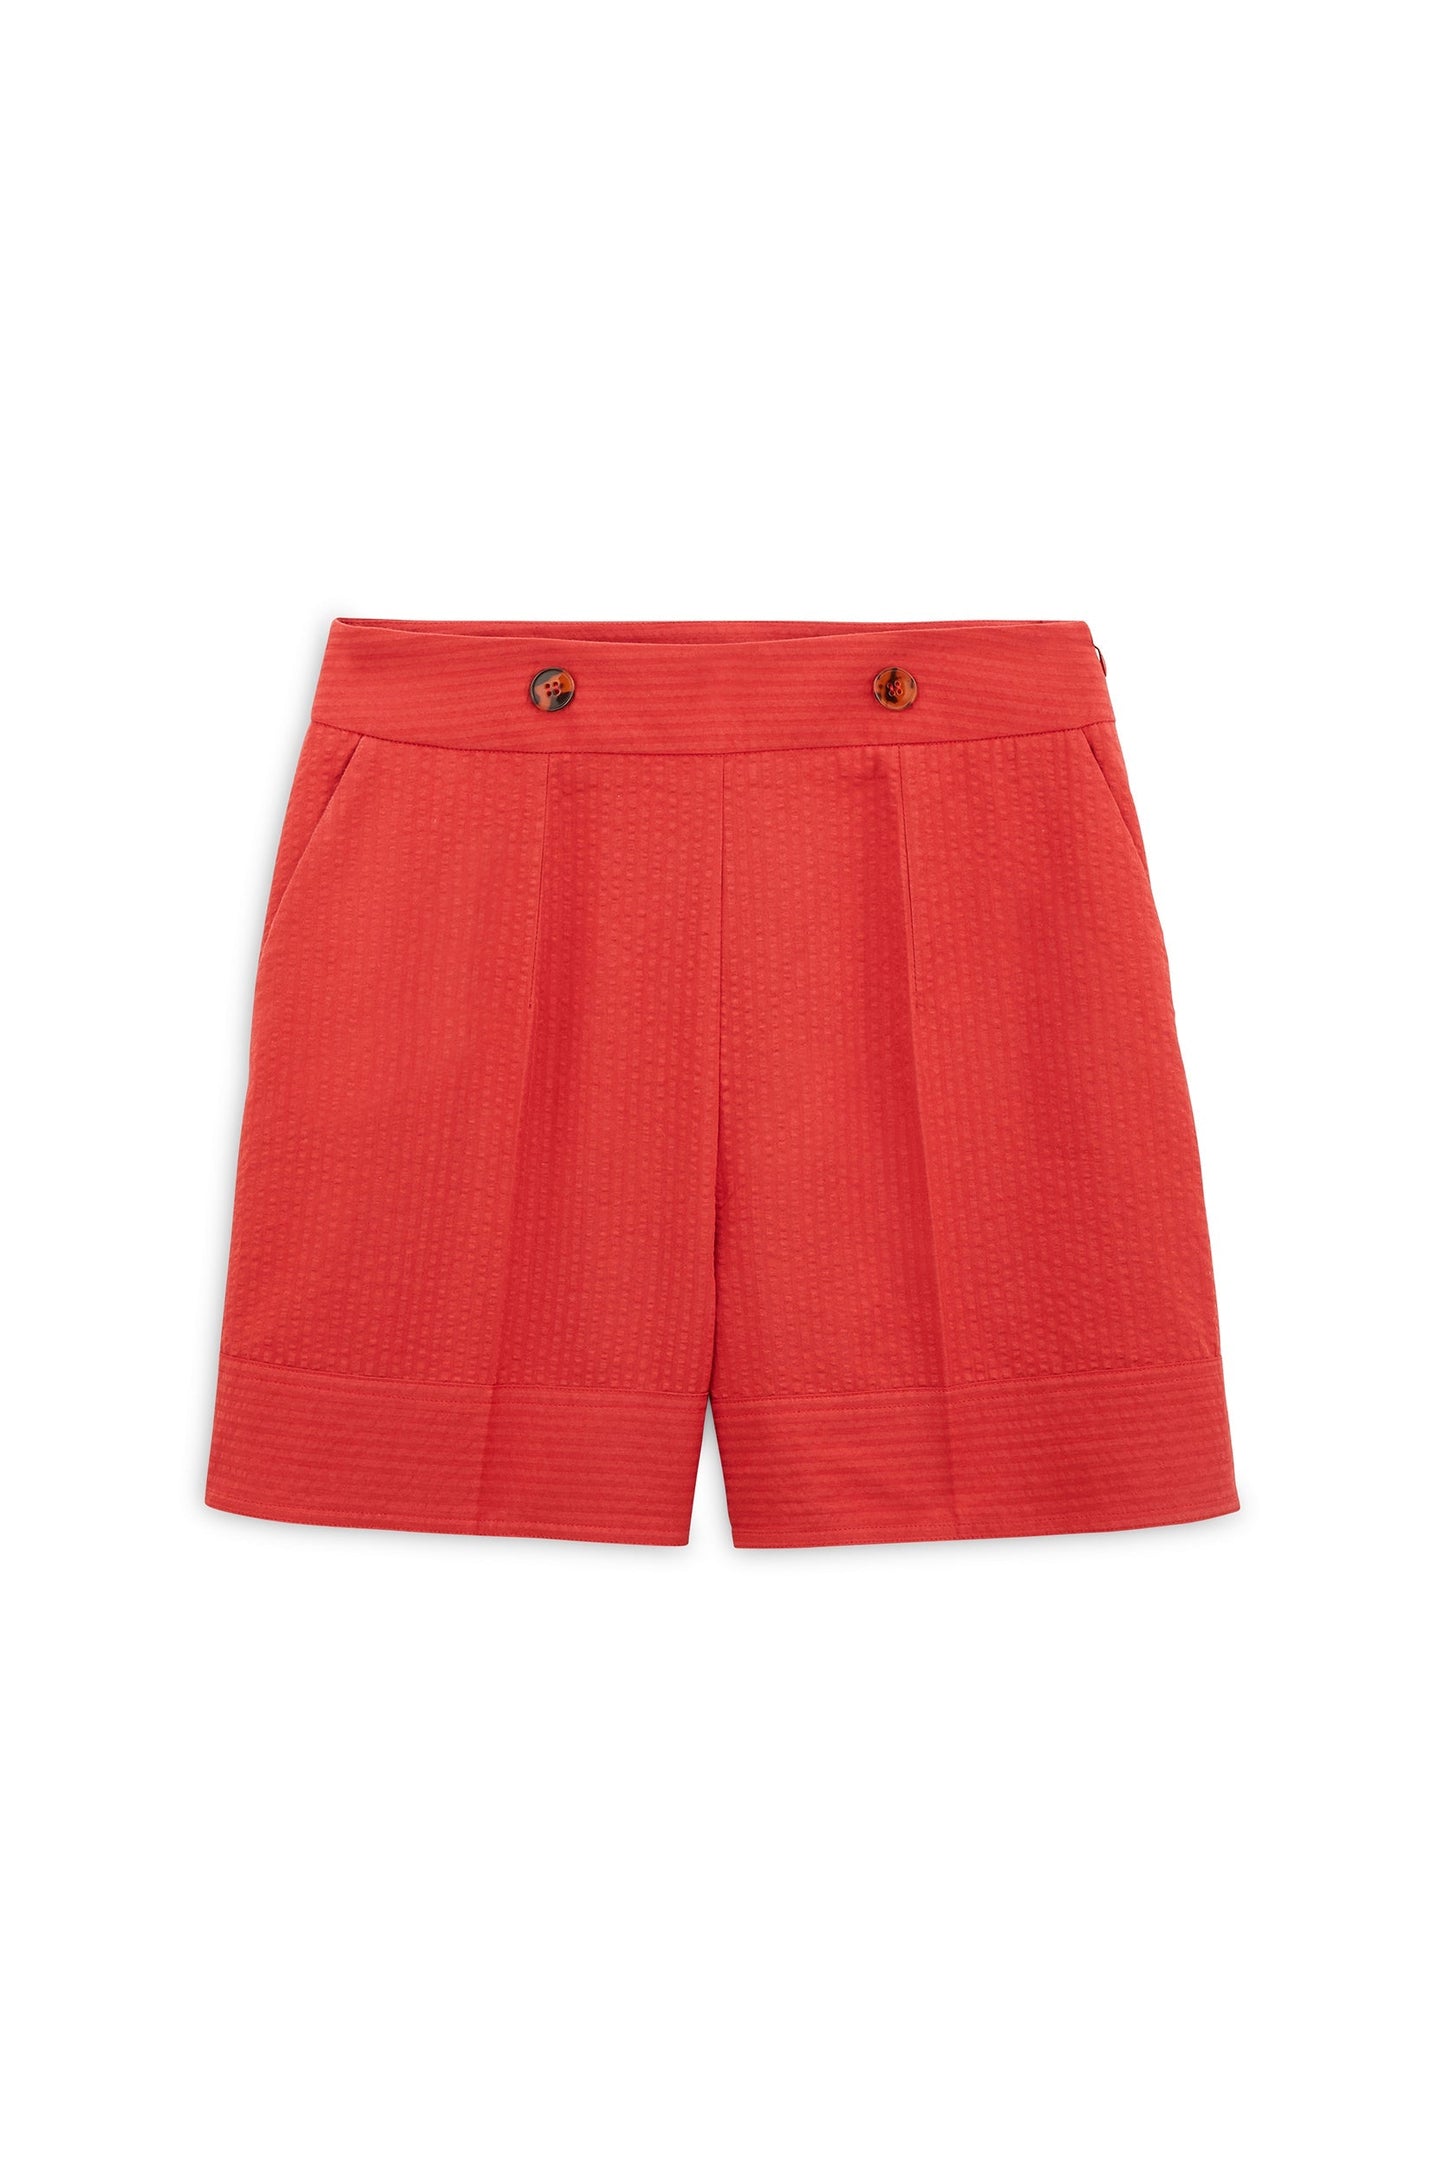 red mar shorts